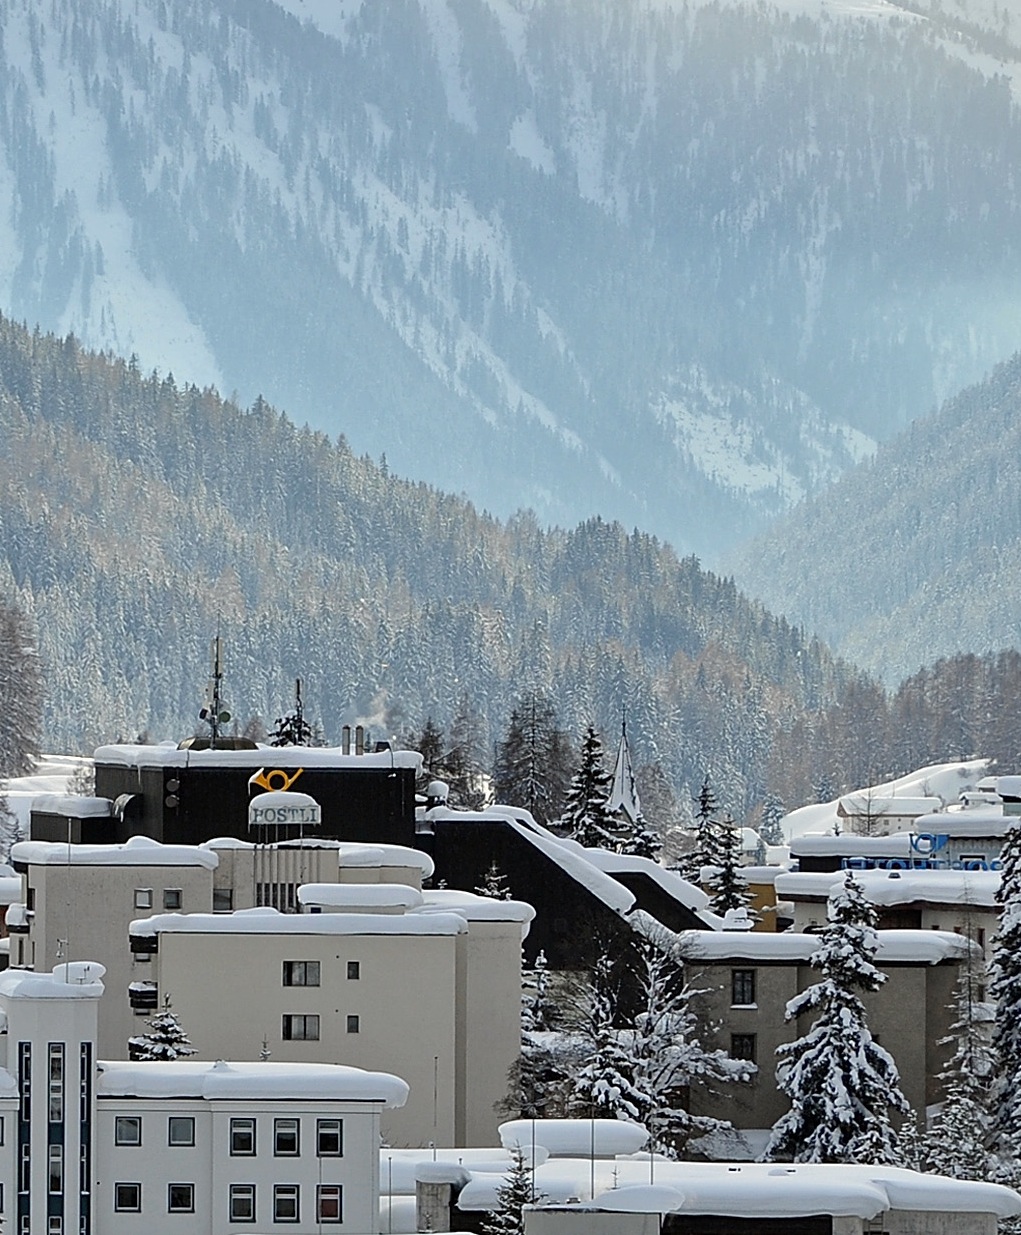 Davos in the Swiss Alps